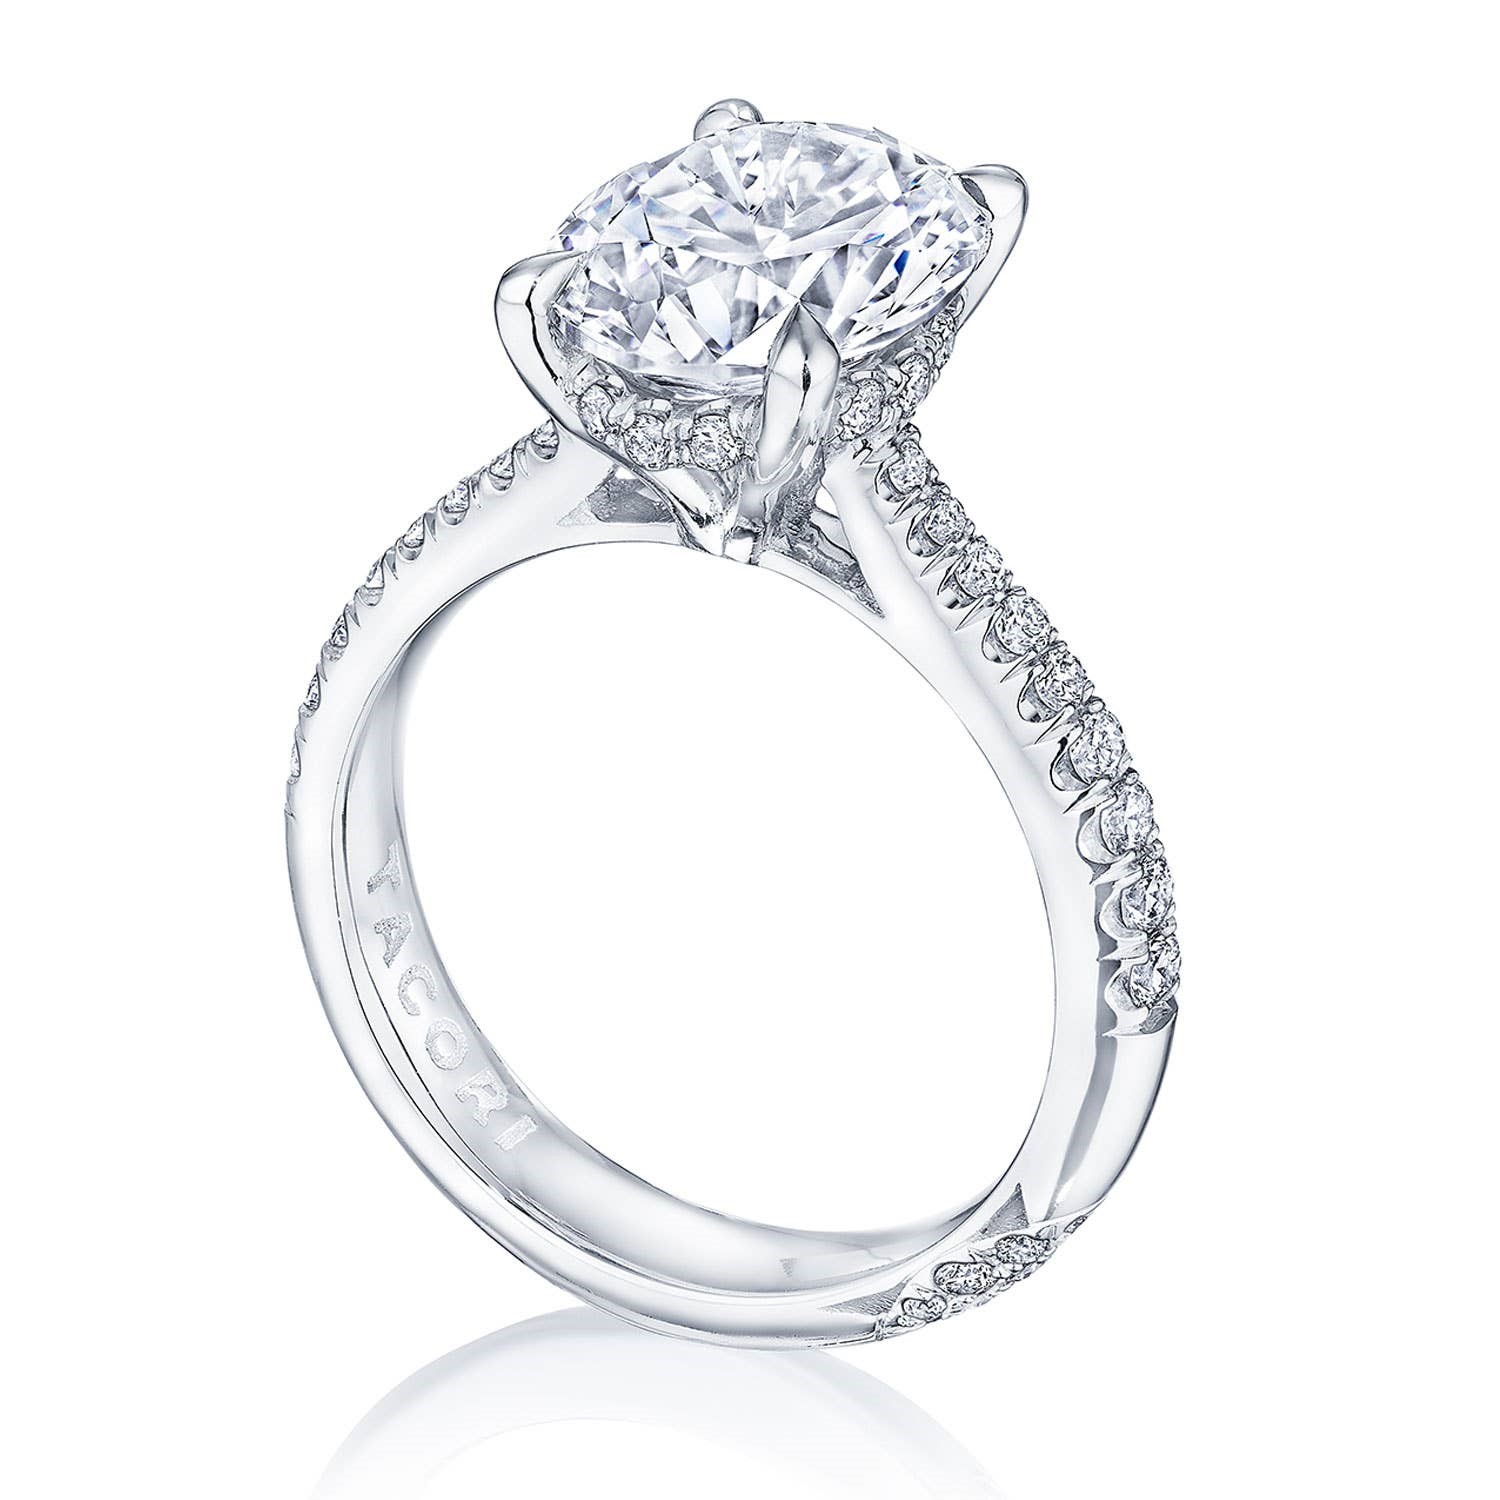 Tacori Platinum Founder's Royal T Round Solitaire Semi- Mount Diamond Engagement Ring .033ctw
*Setting Only, Center Stone Not Included